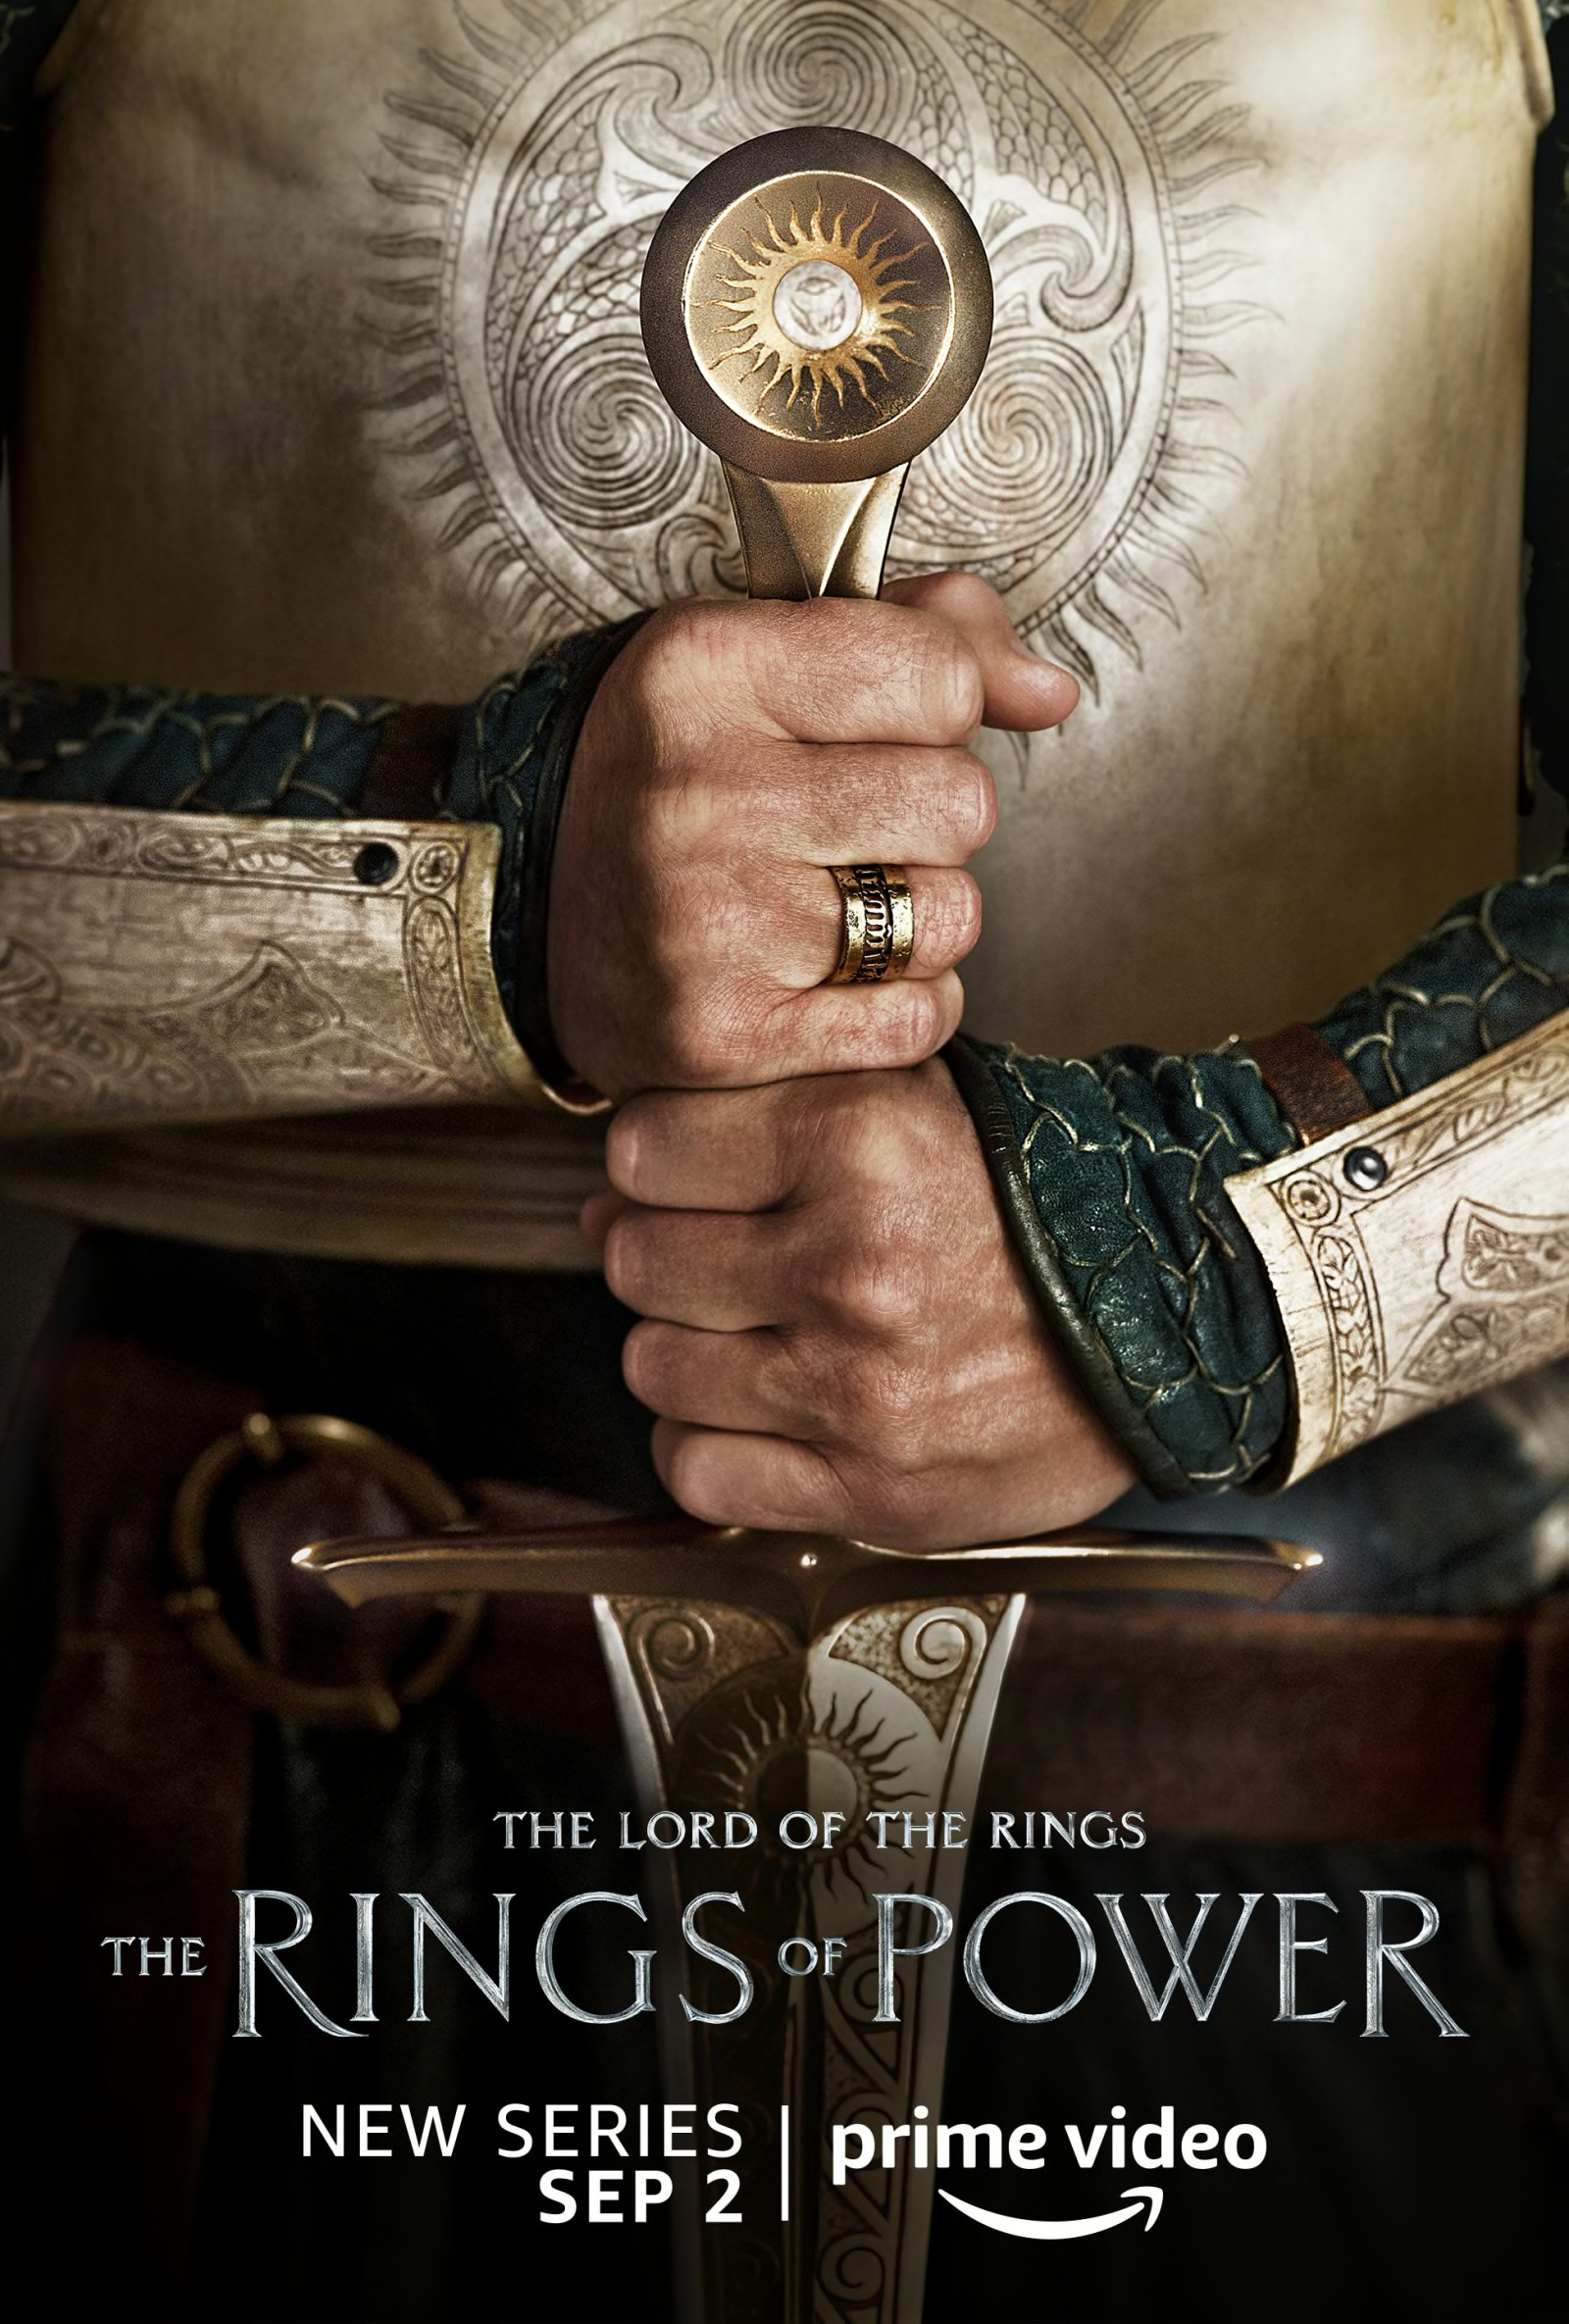 The Lord of the Rings The Rings of Power: Trailer, Release Date